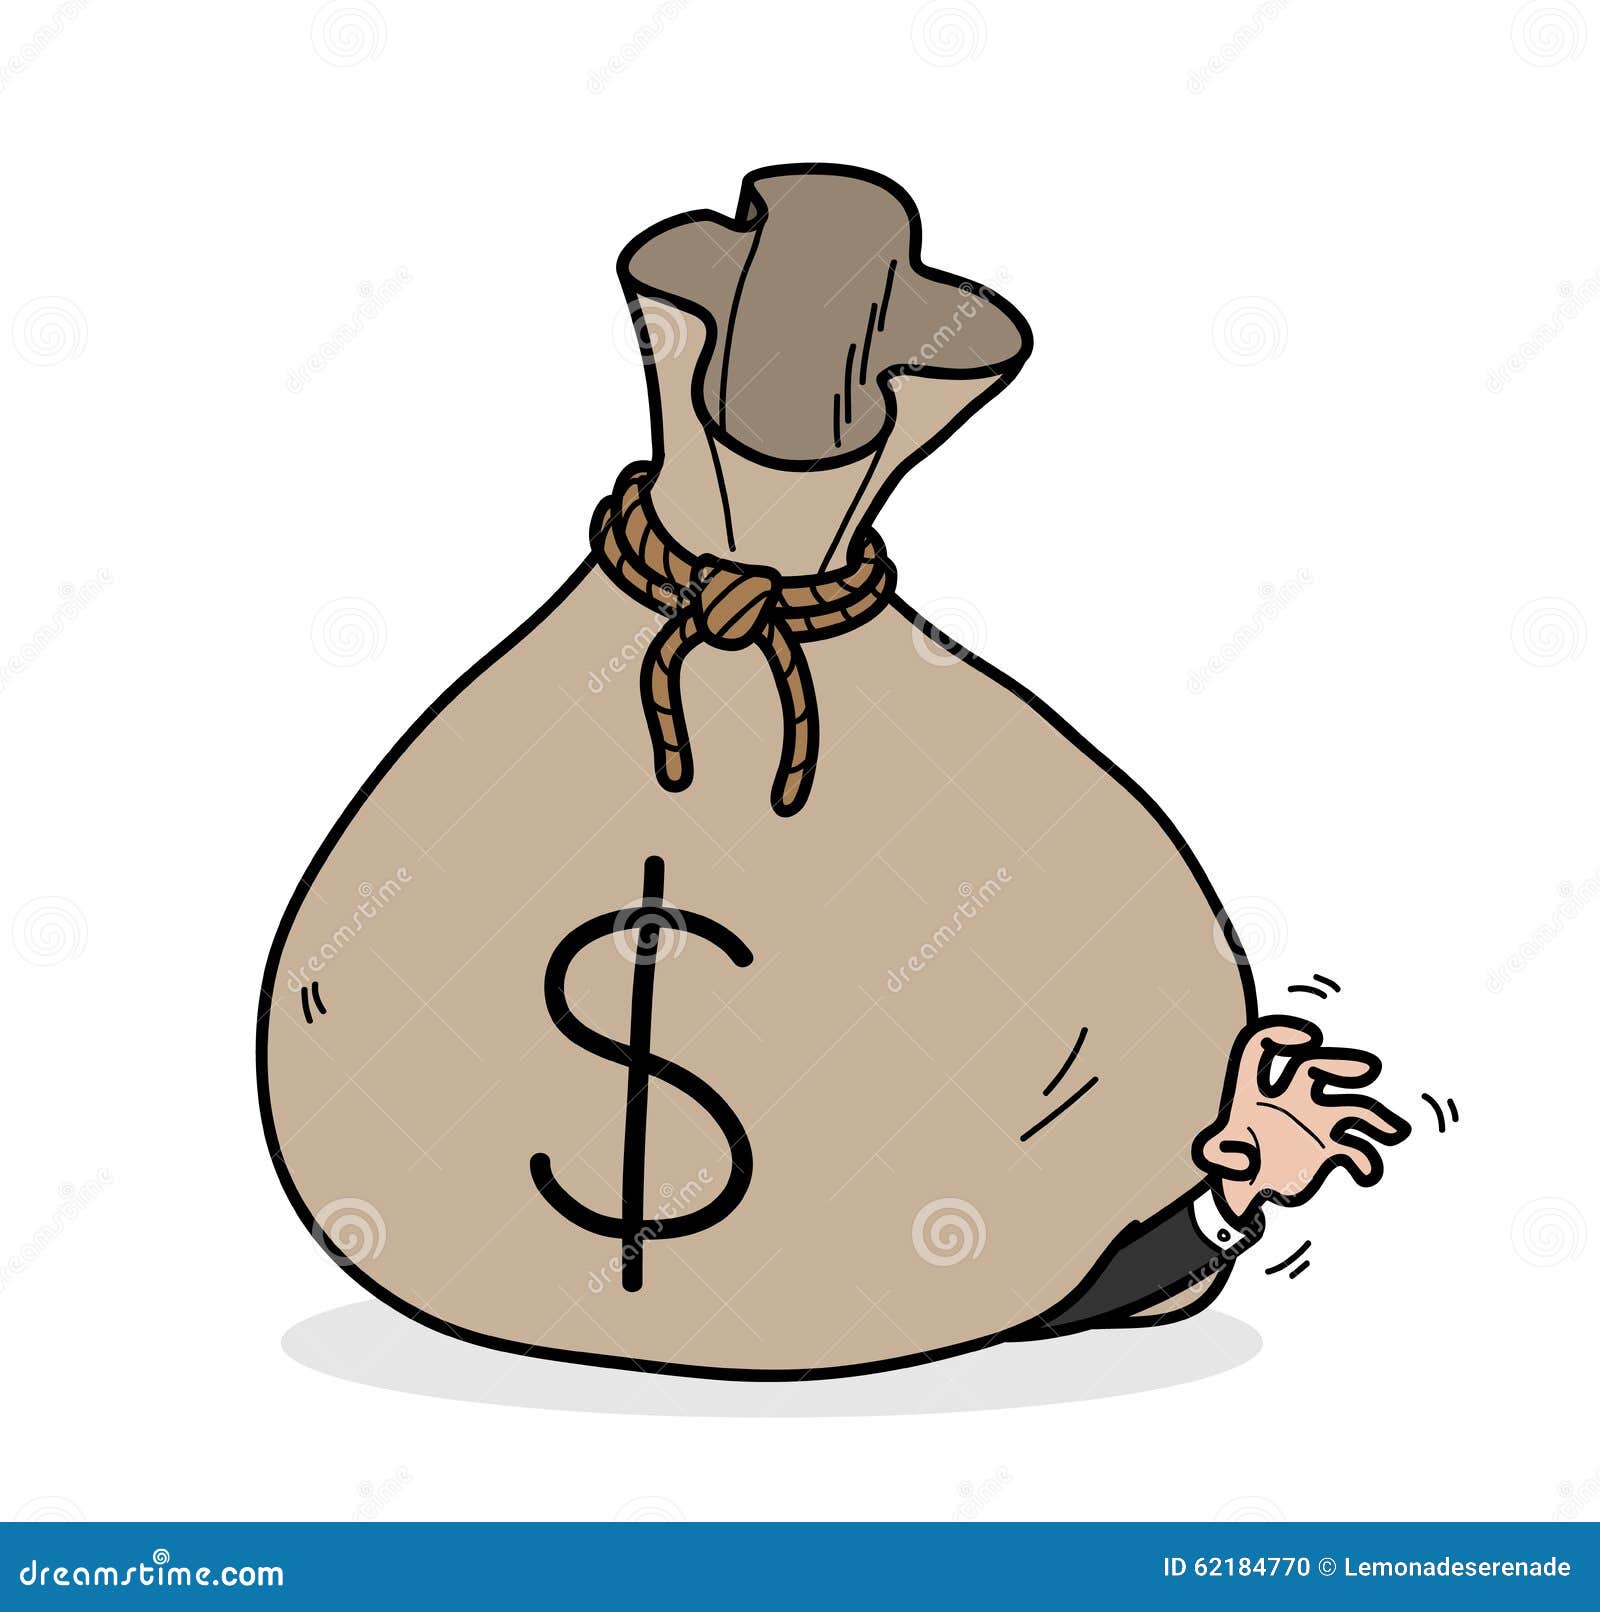 Greed stock vector. Illustration of business, vector - 62184770